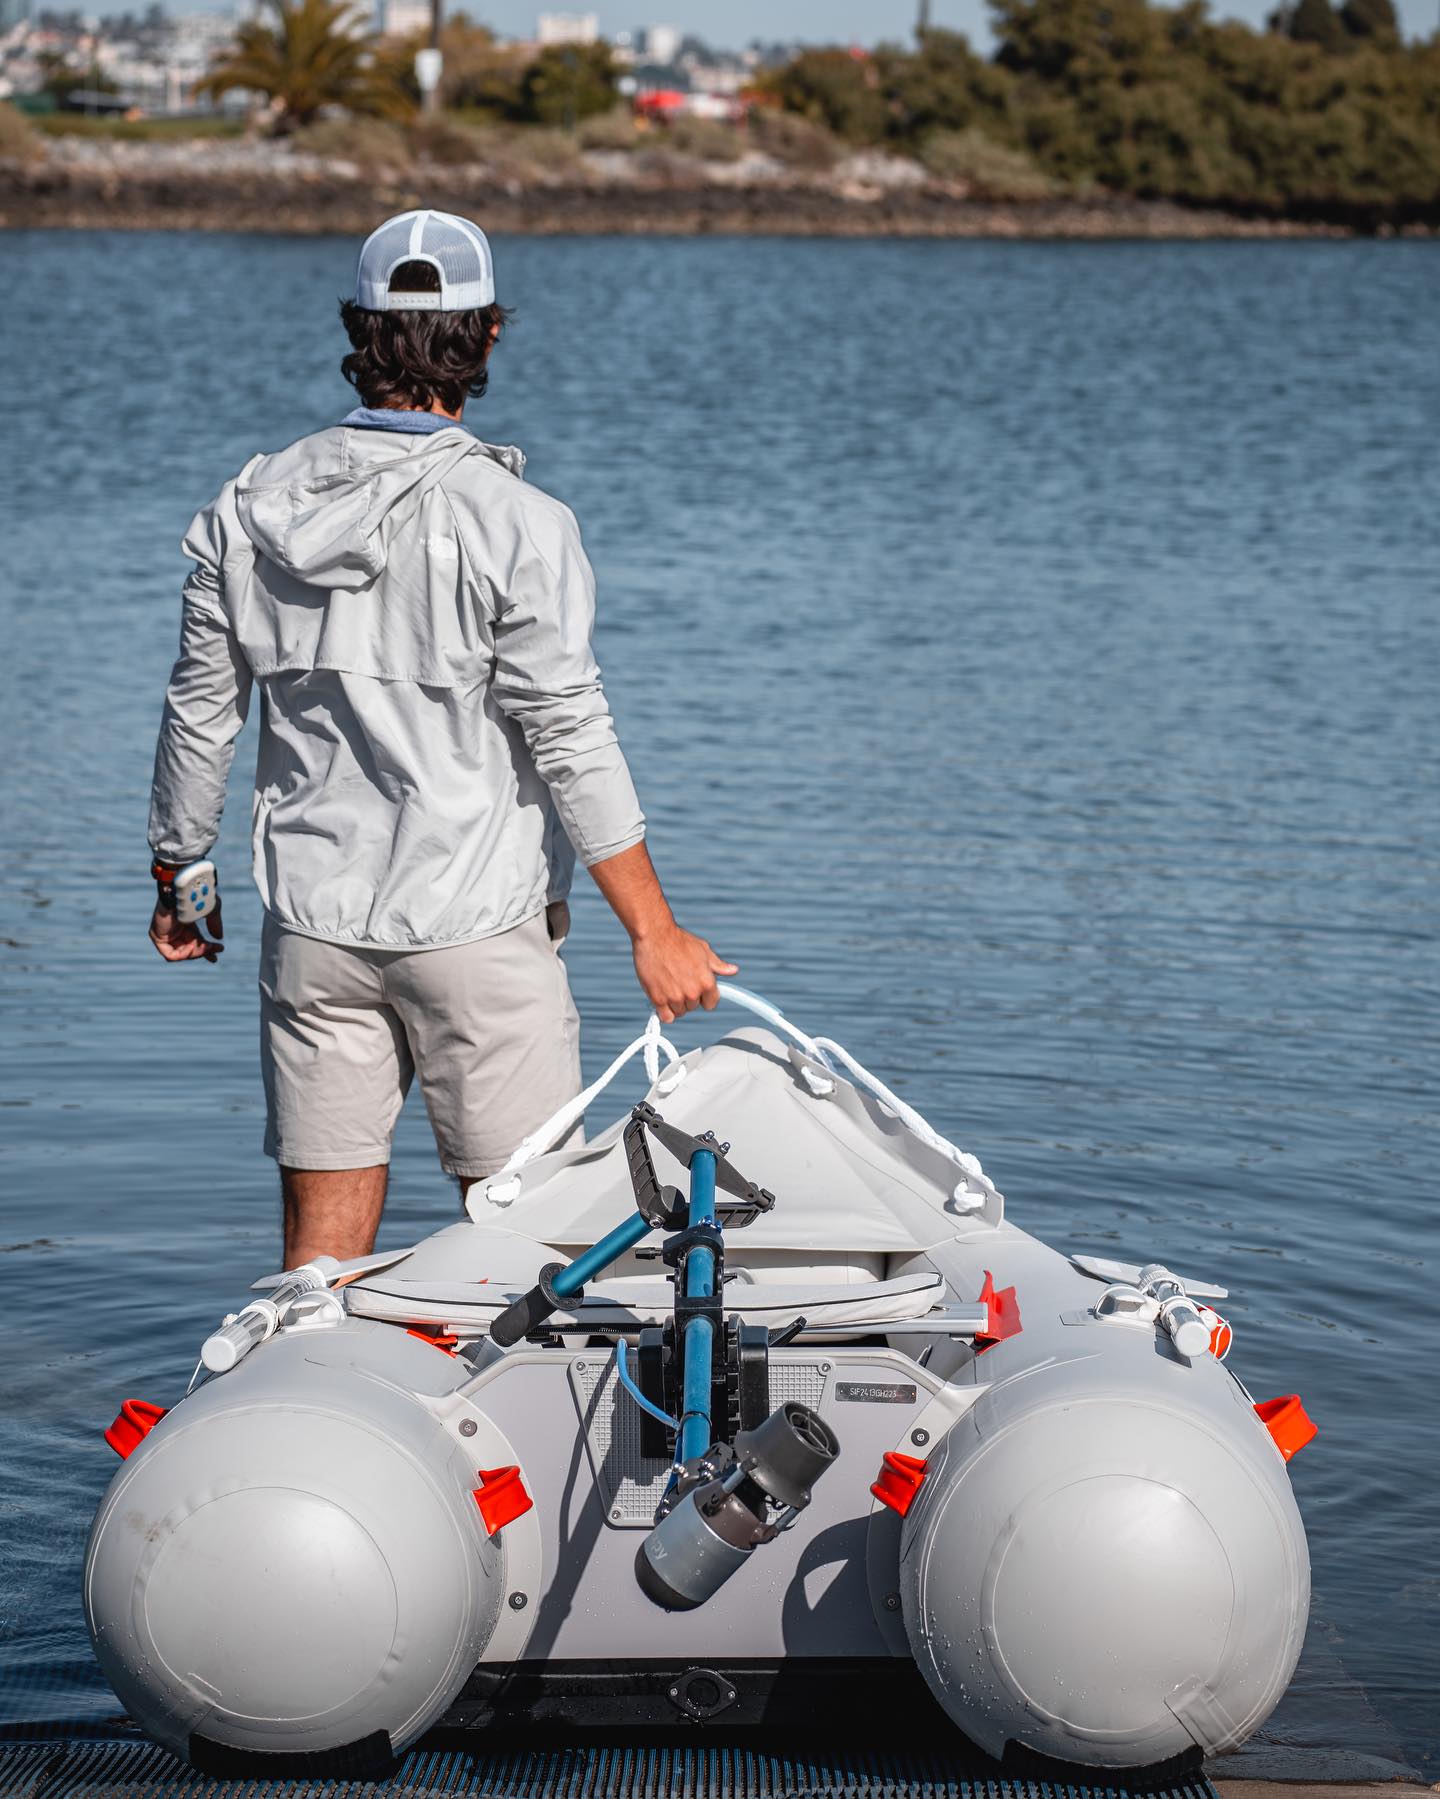 Man hauling inflatable boat to the water with a Bixpy motor on it